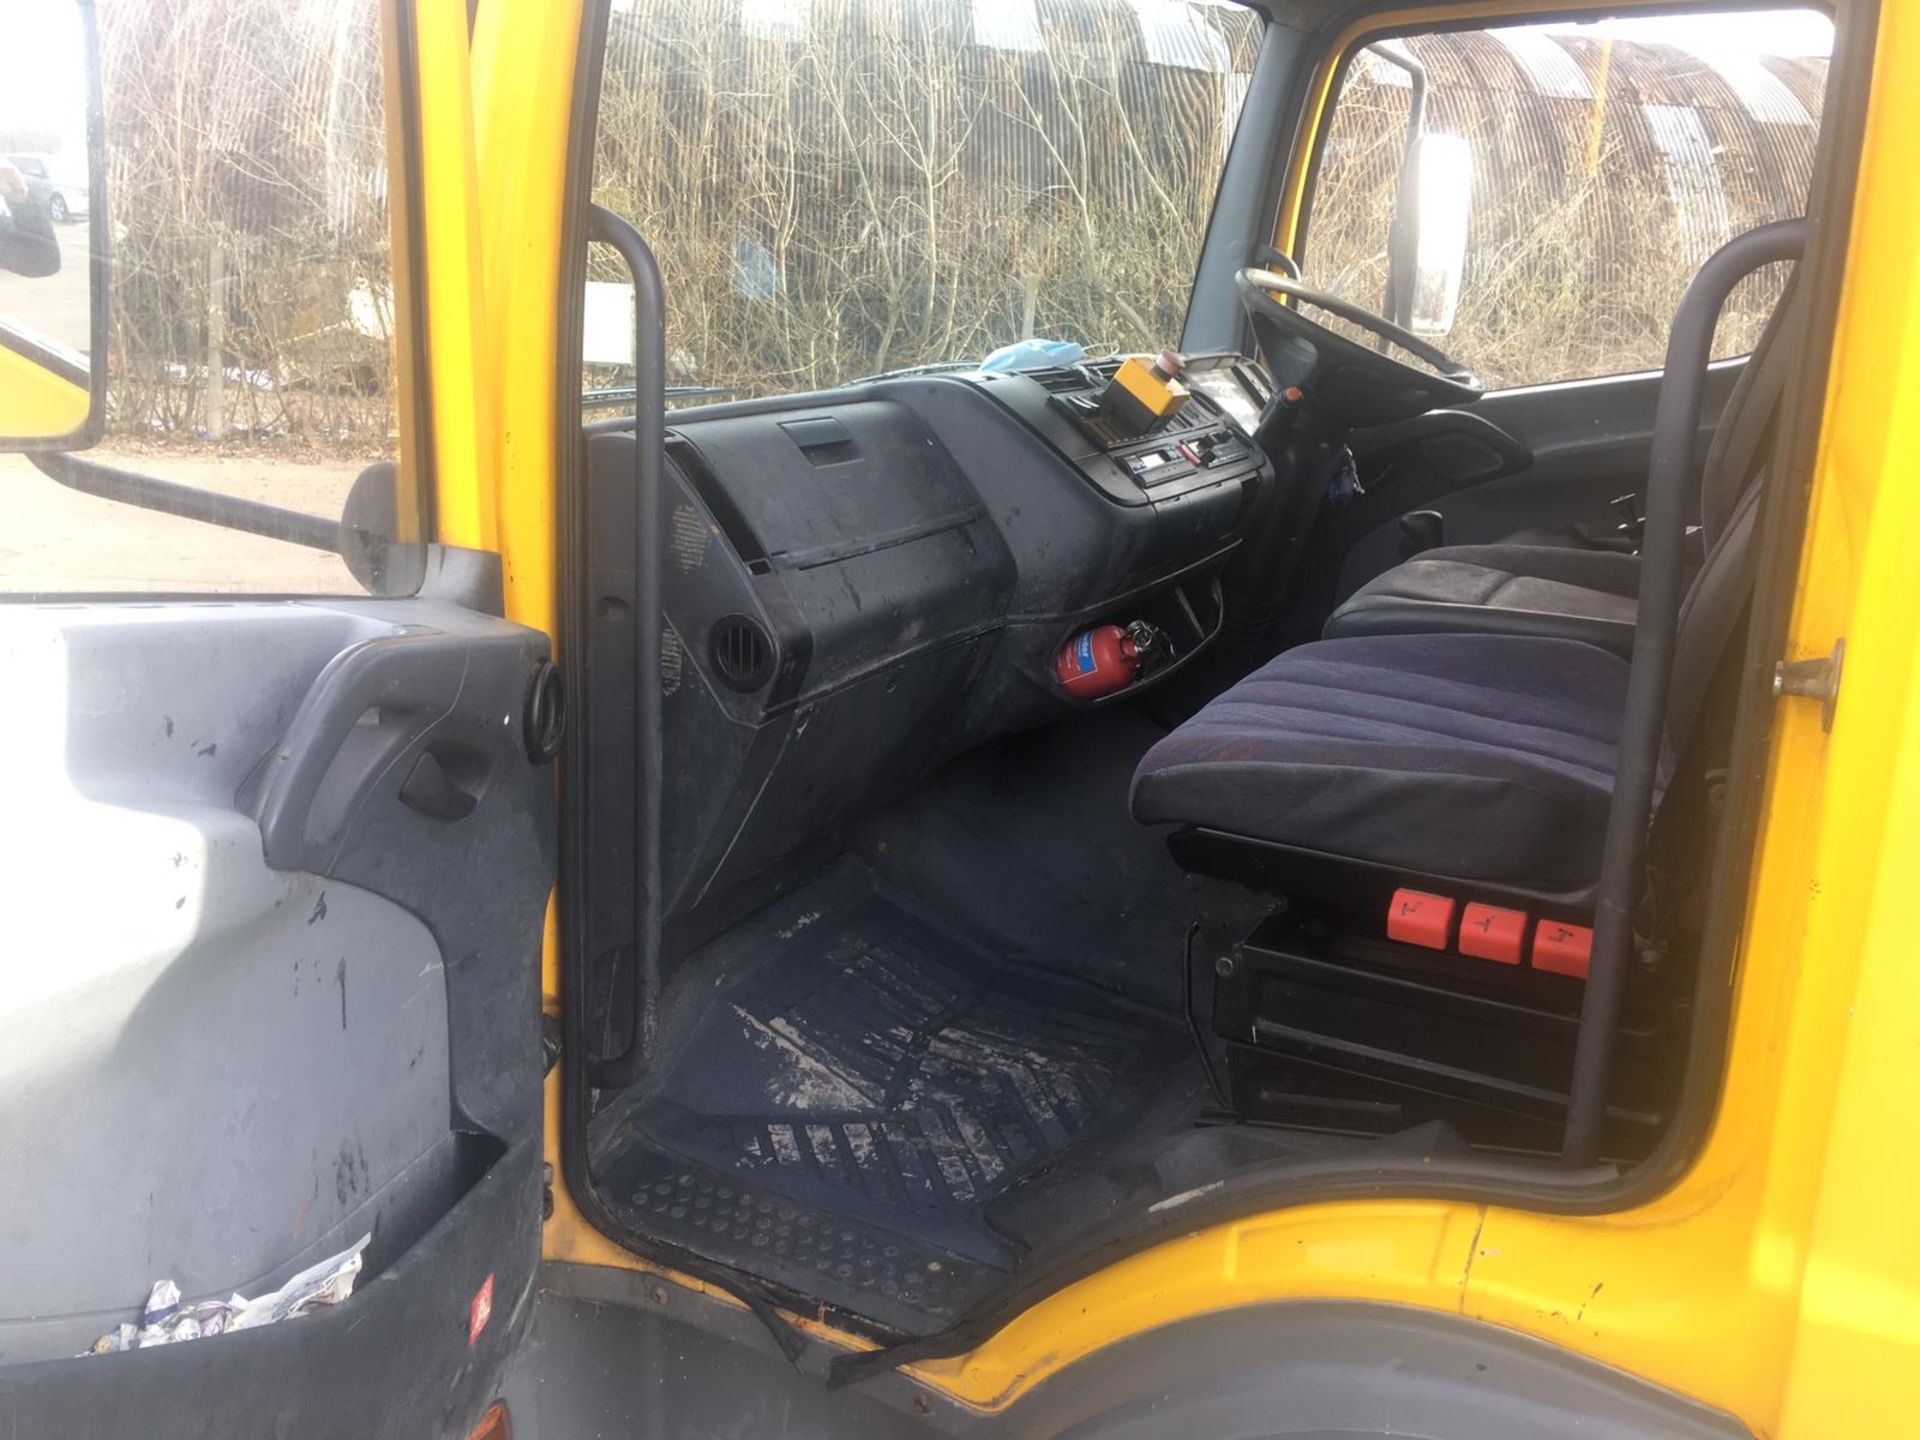 2004/54 REG MERCEDES ATEGO 1018 DAY YELLOW DROPSIDE LINE PAINTING LORRY 4.3L DIESEL ENGINE *NO VAT* - Image 27 of 64